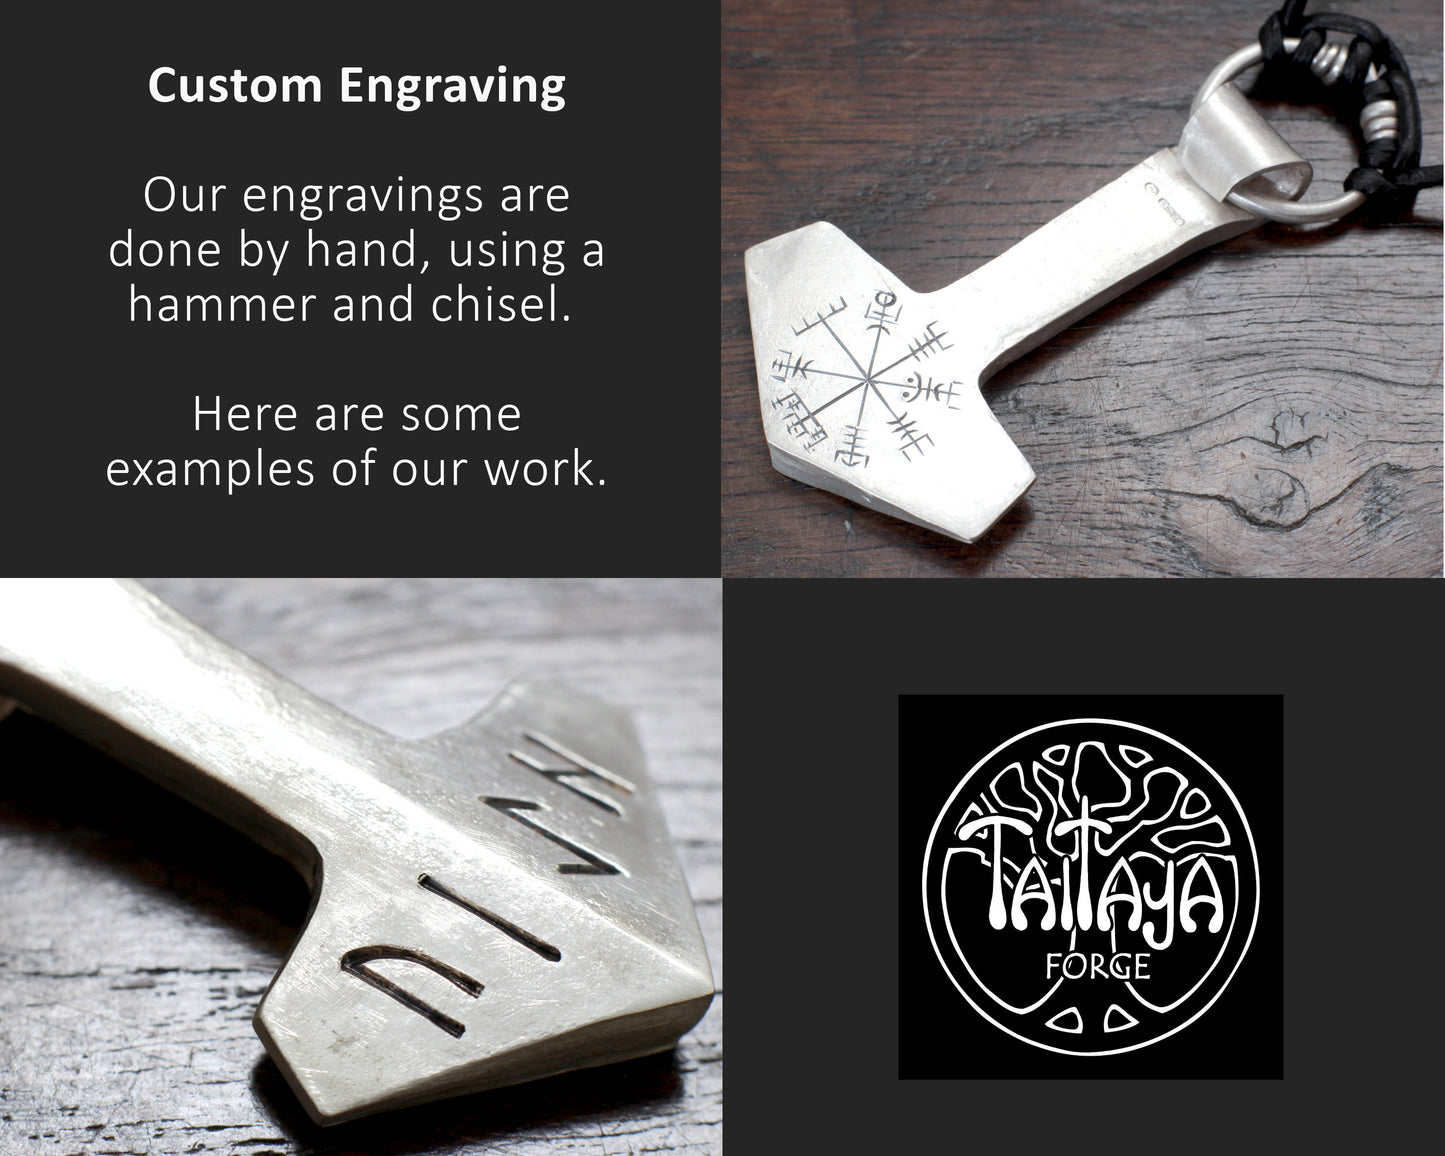 Large Solid Silver Mjölnir, Thors Hammer, pendant. By Taitaya Forge, all rights reserved